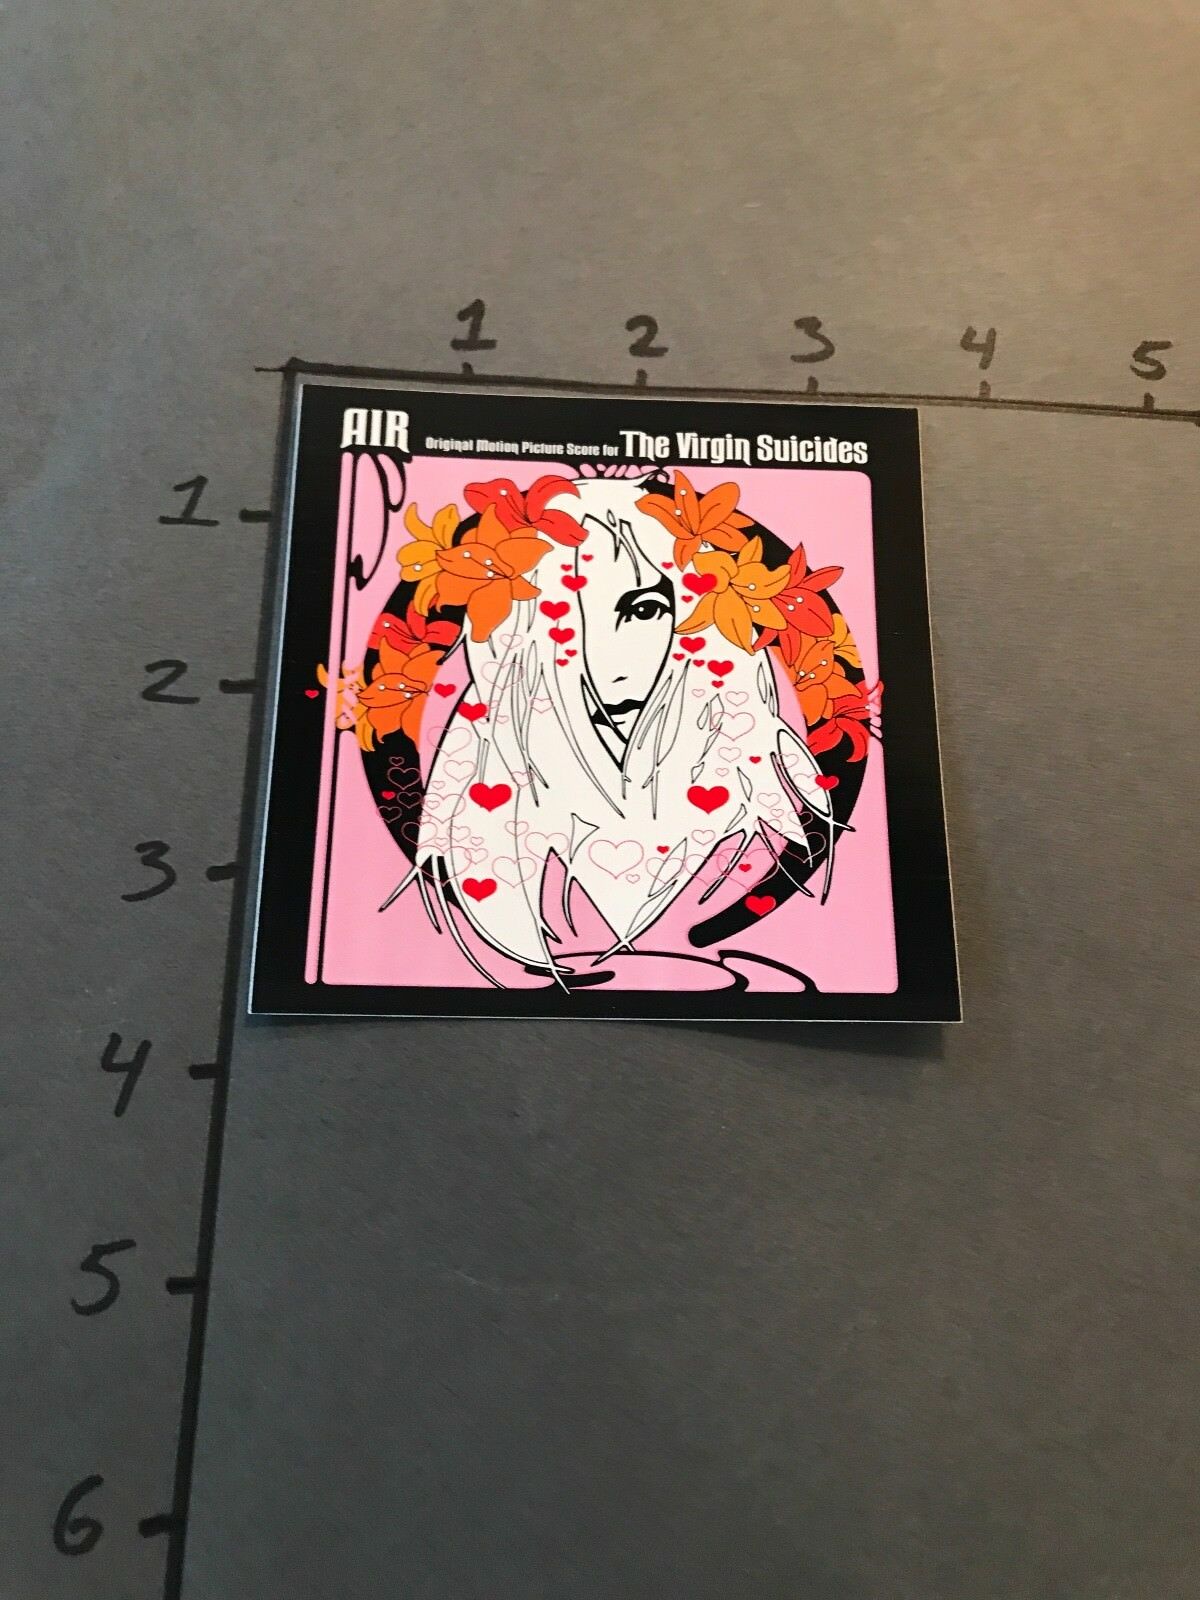 Air The Virgin Suicides Sticker Promo 3.5x3.5 RARE PROMOTIONAL HYPE STICKER